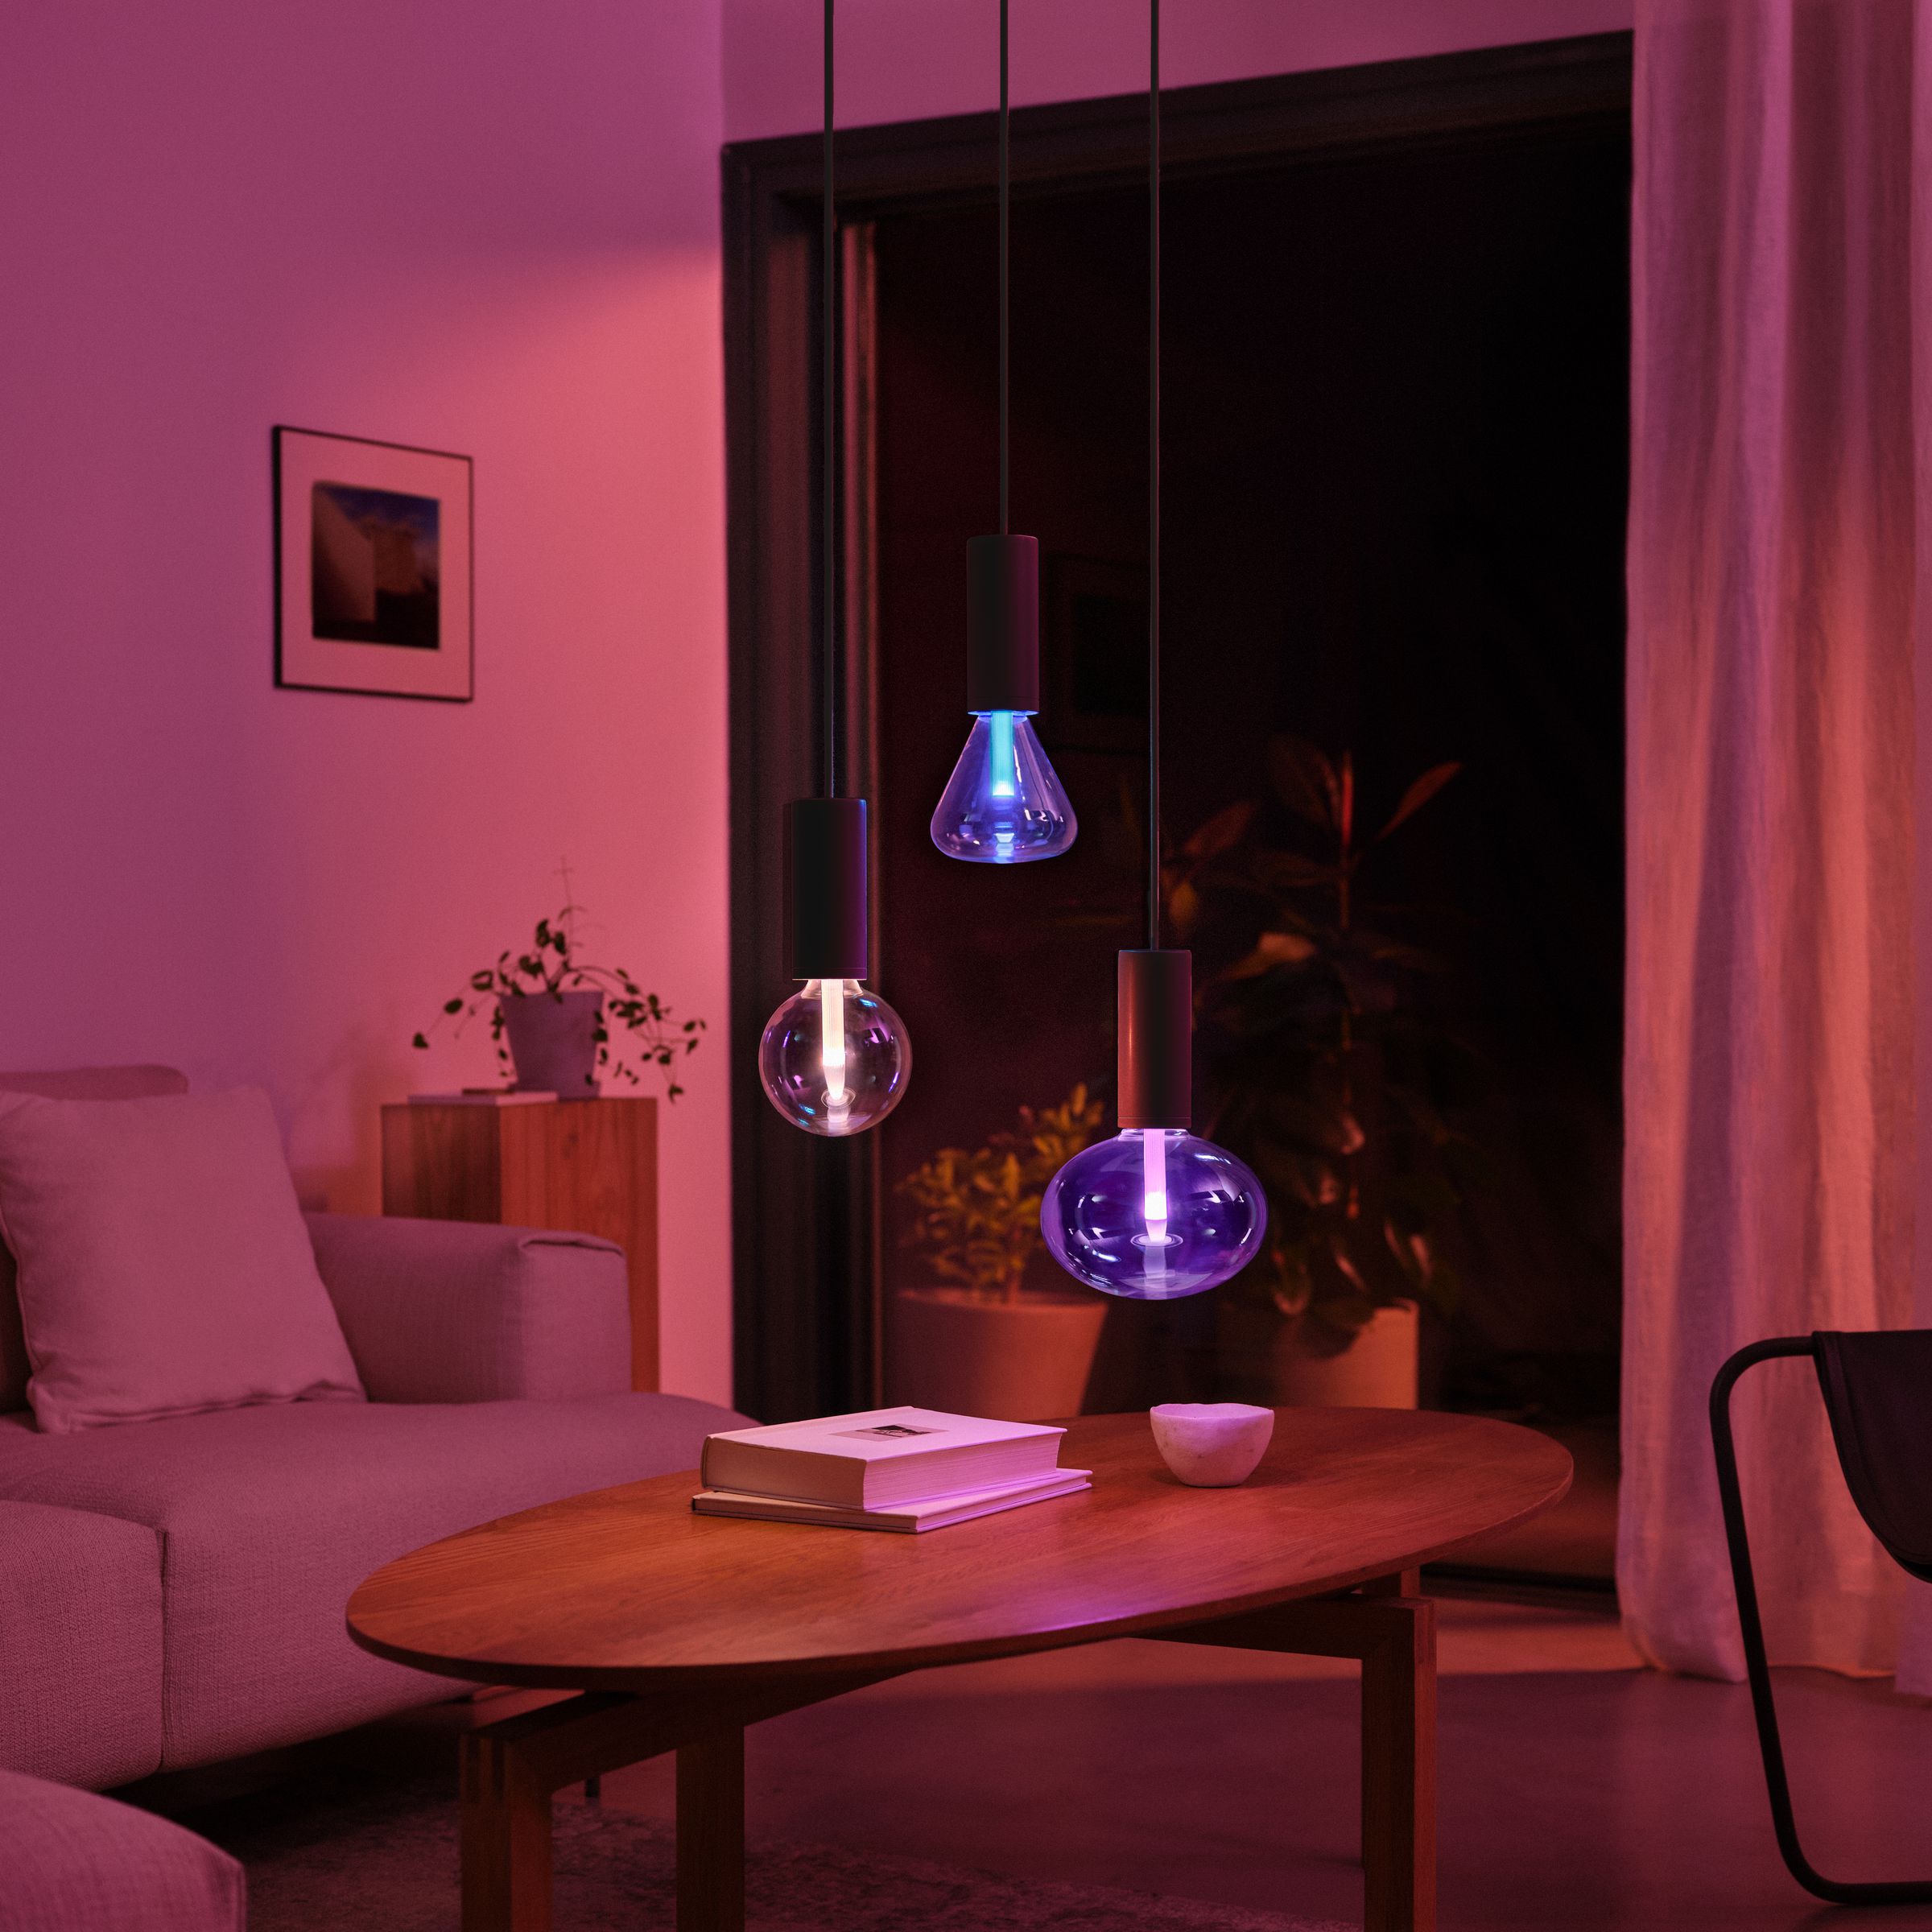 Three colorful lightbulbs hanging above a coffee table in a dark room.